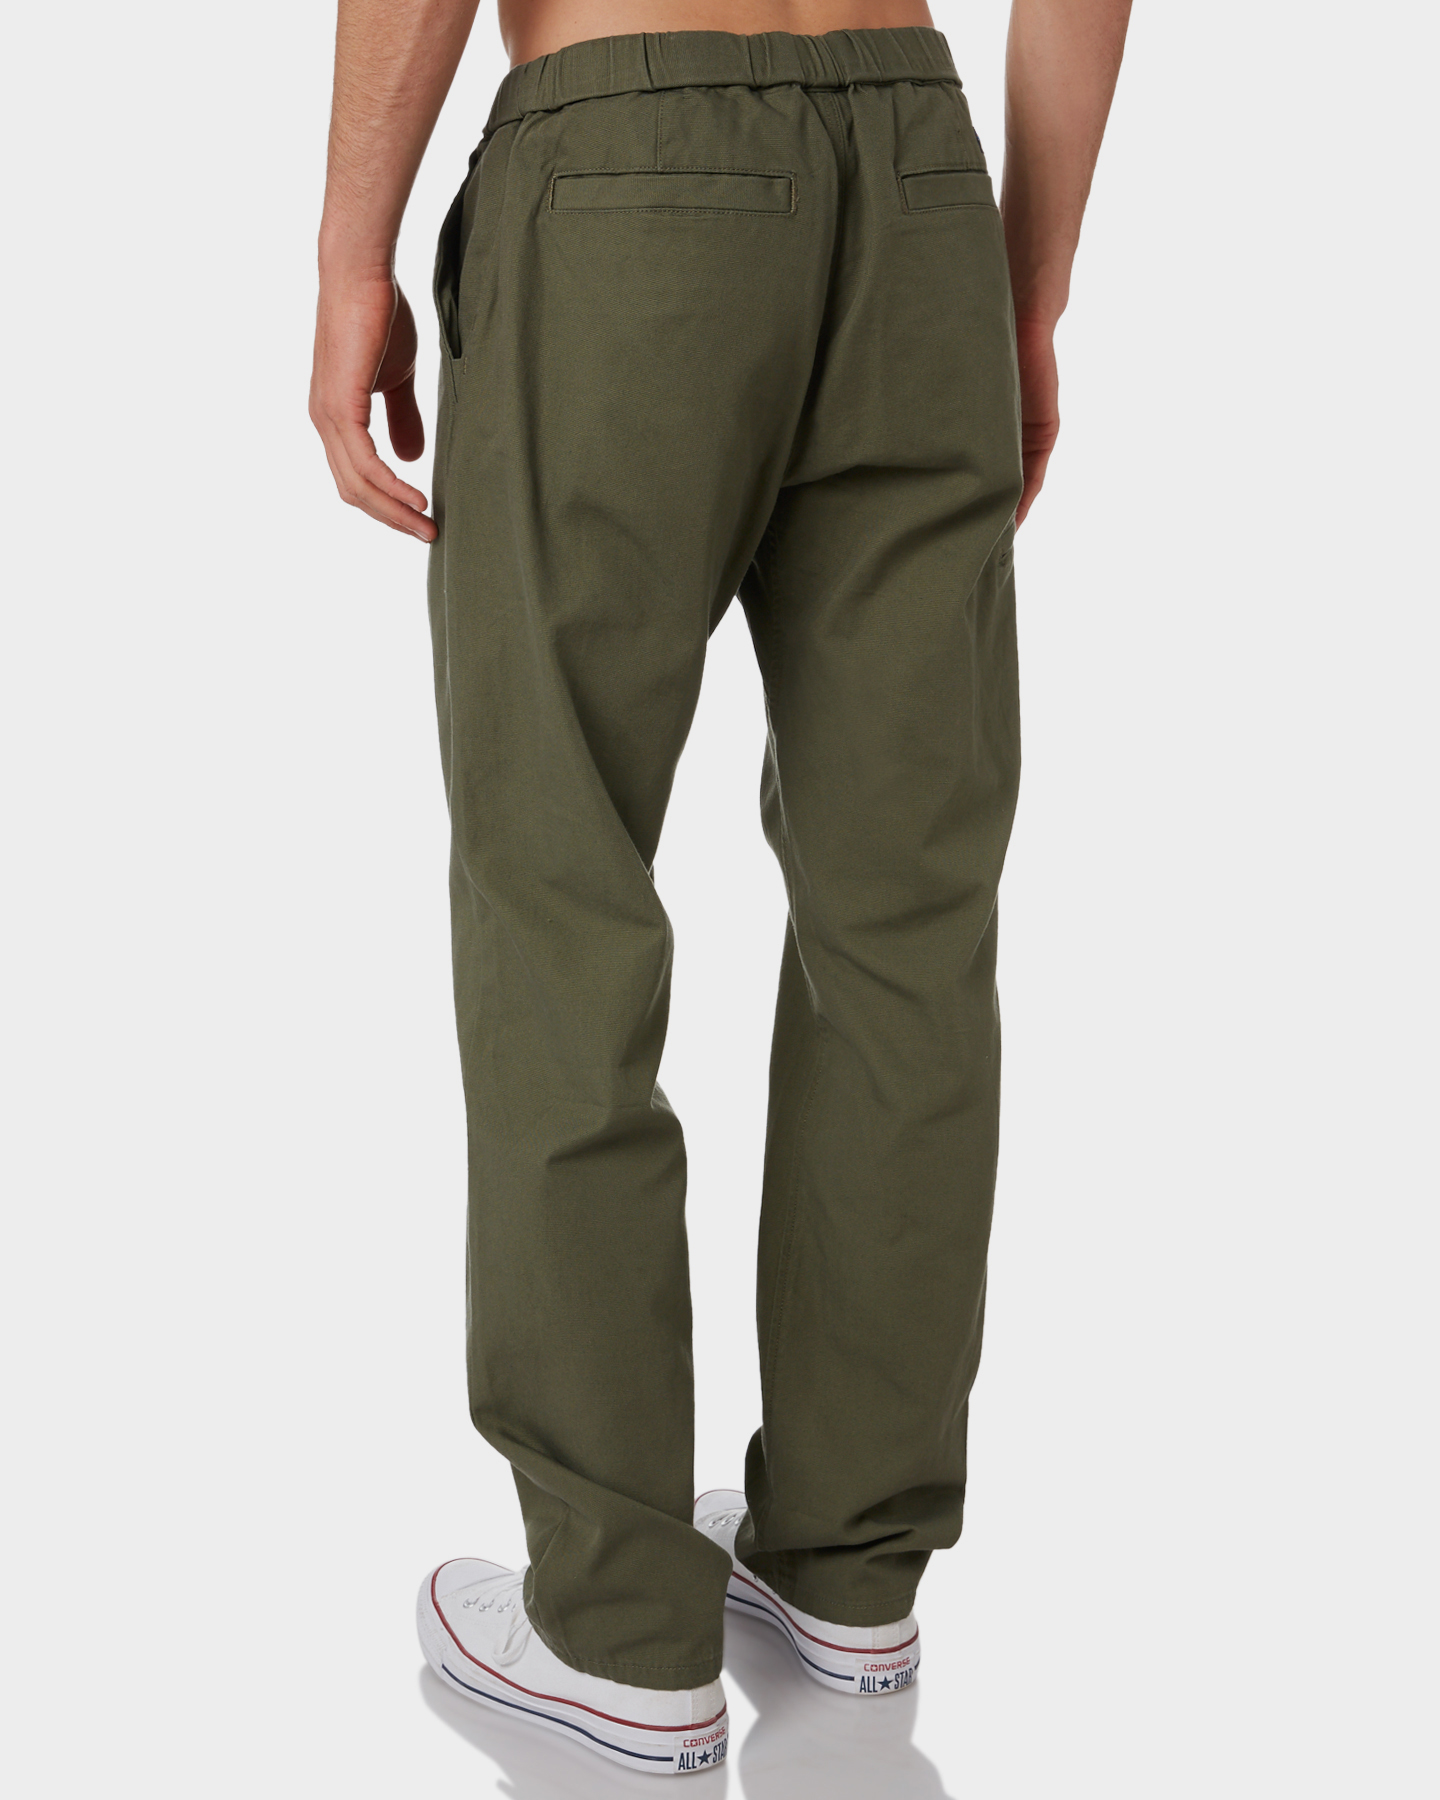 Patagonia Organic Cotton Gi Mens Pant - Indust Green Canvas | SurfStitch